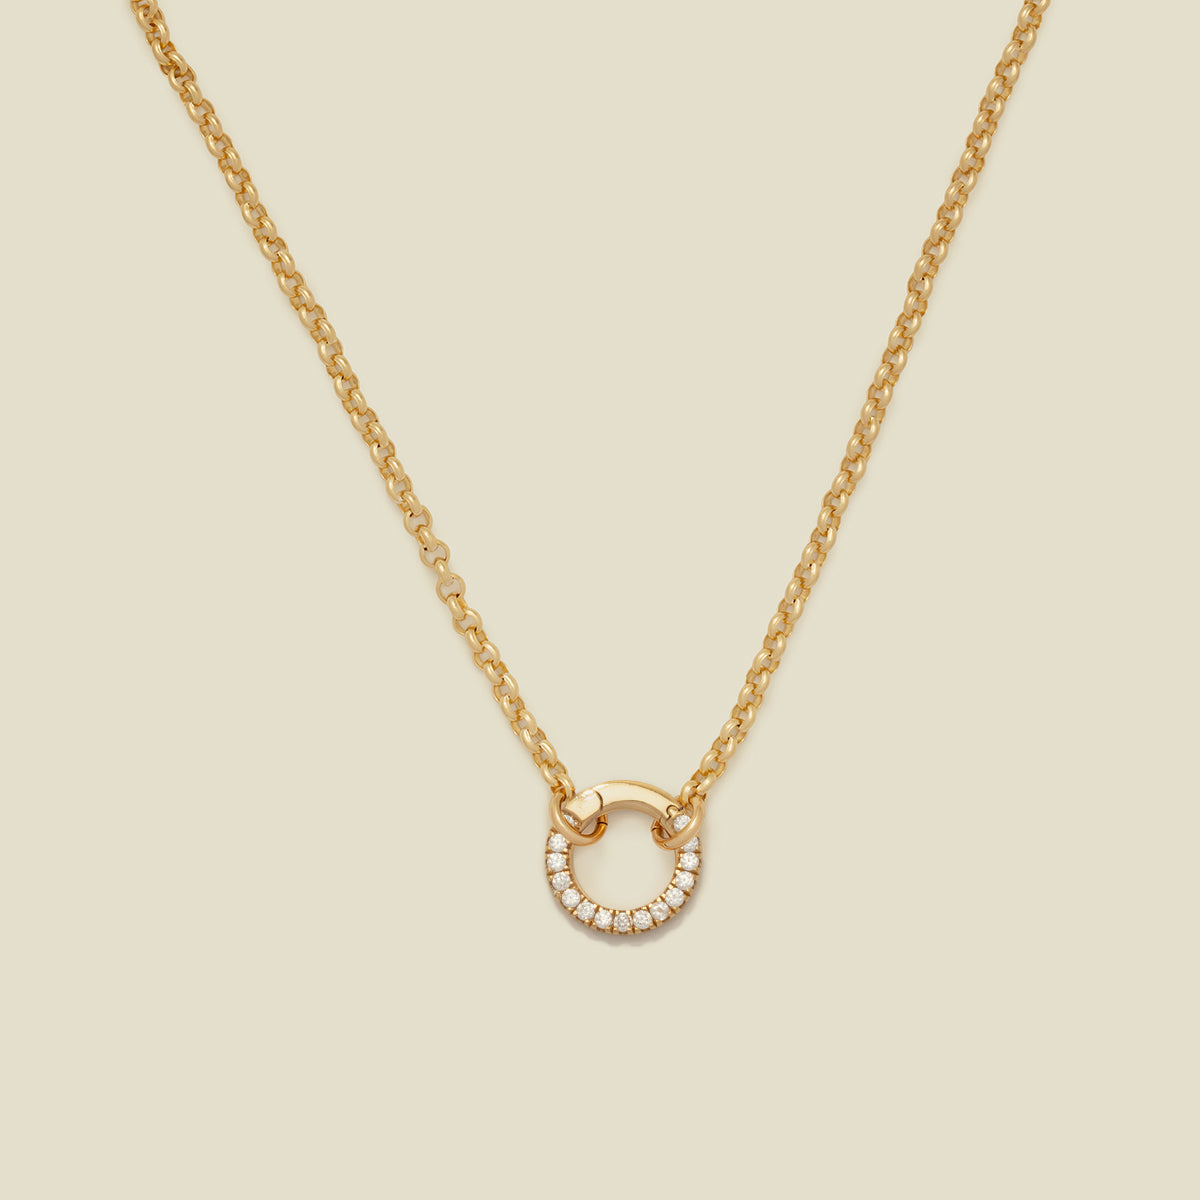 Rolo Charm Necklace Gold Filled / With CZ Link Lock Necklace